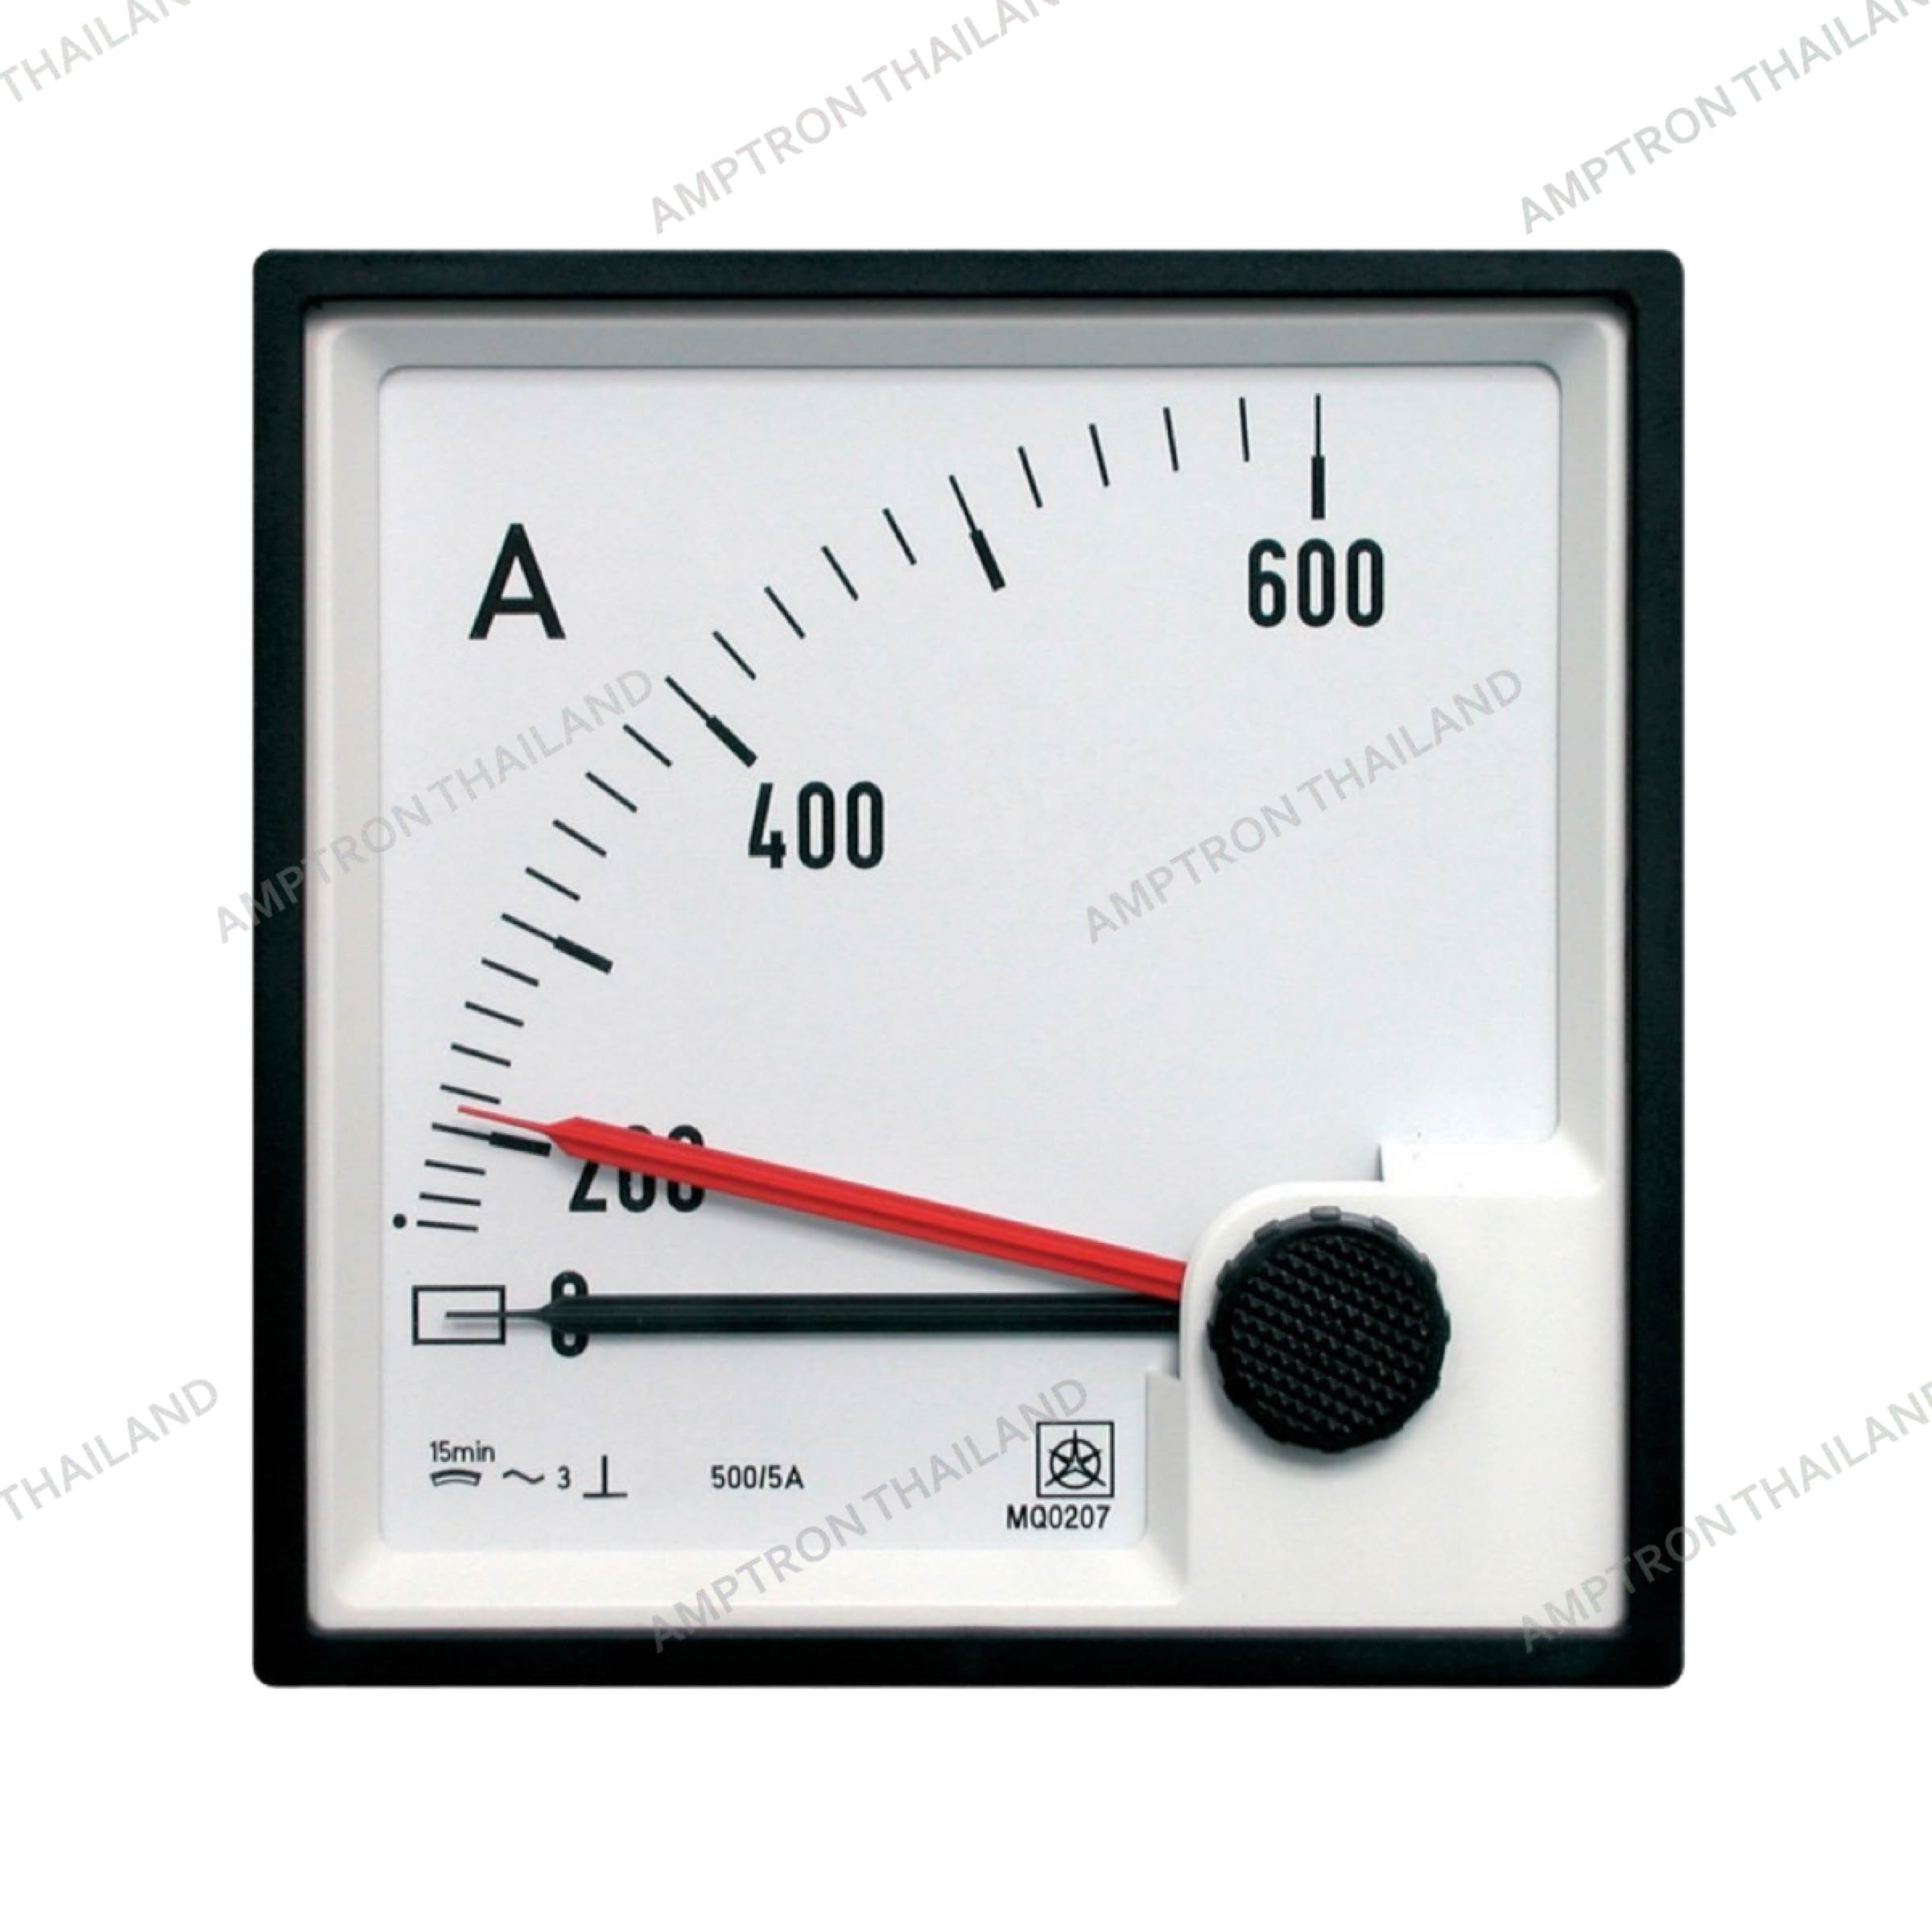 Moving Iron AC Amp Meter with Max Demand IEC or DIN